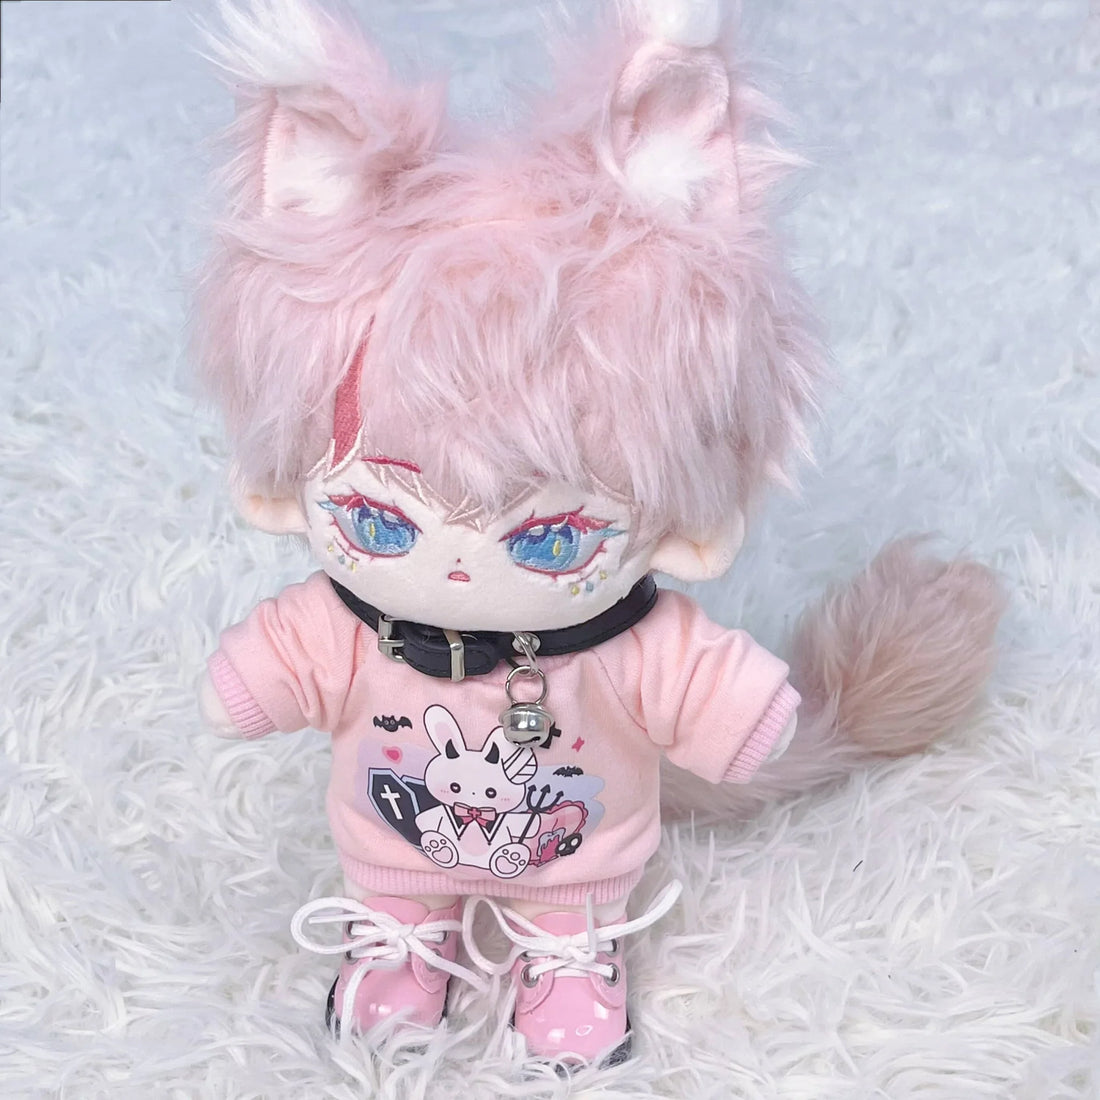 20Cm The Mountainsea Kylin Plush Cute Doll With Outfit Changeable Full Set Outfits Include Shoes